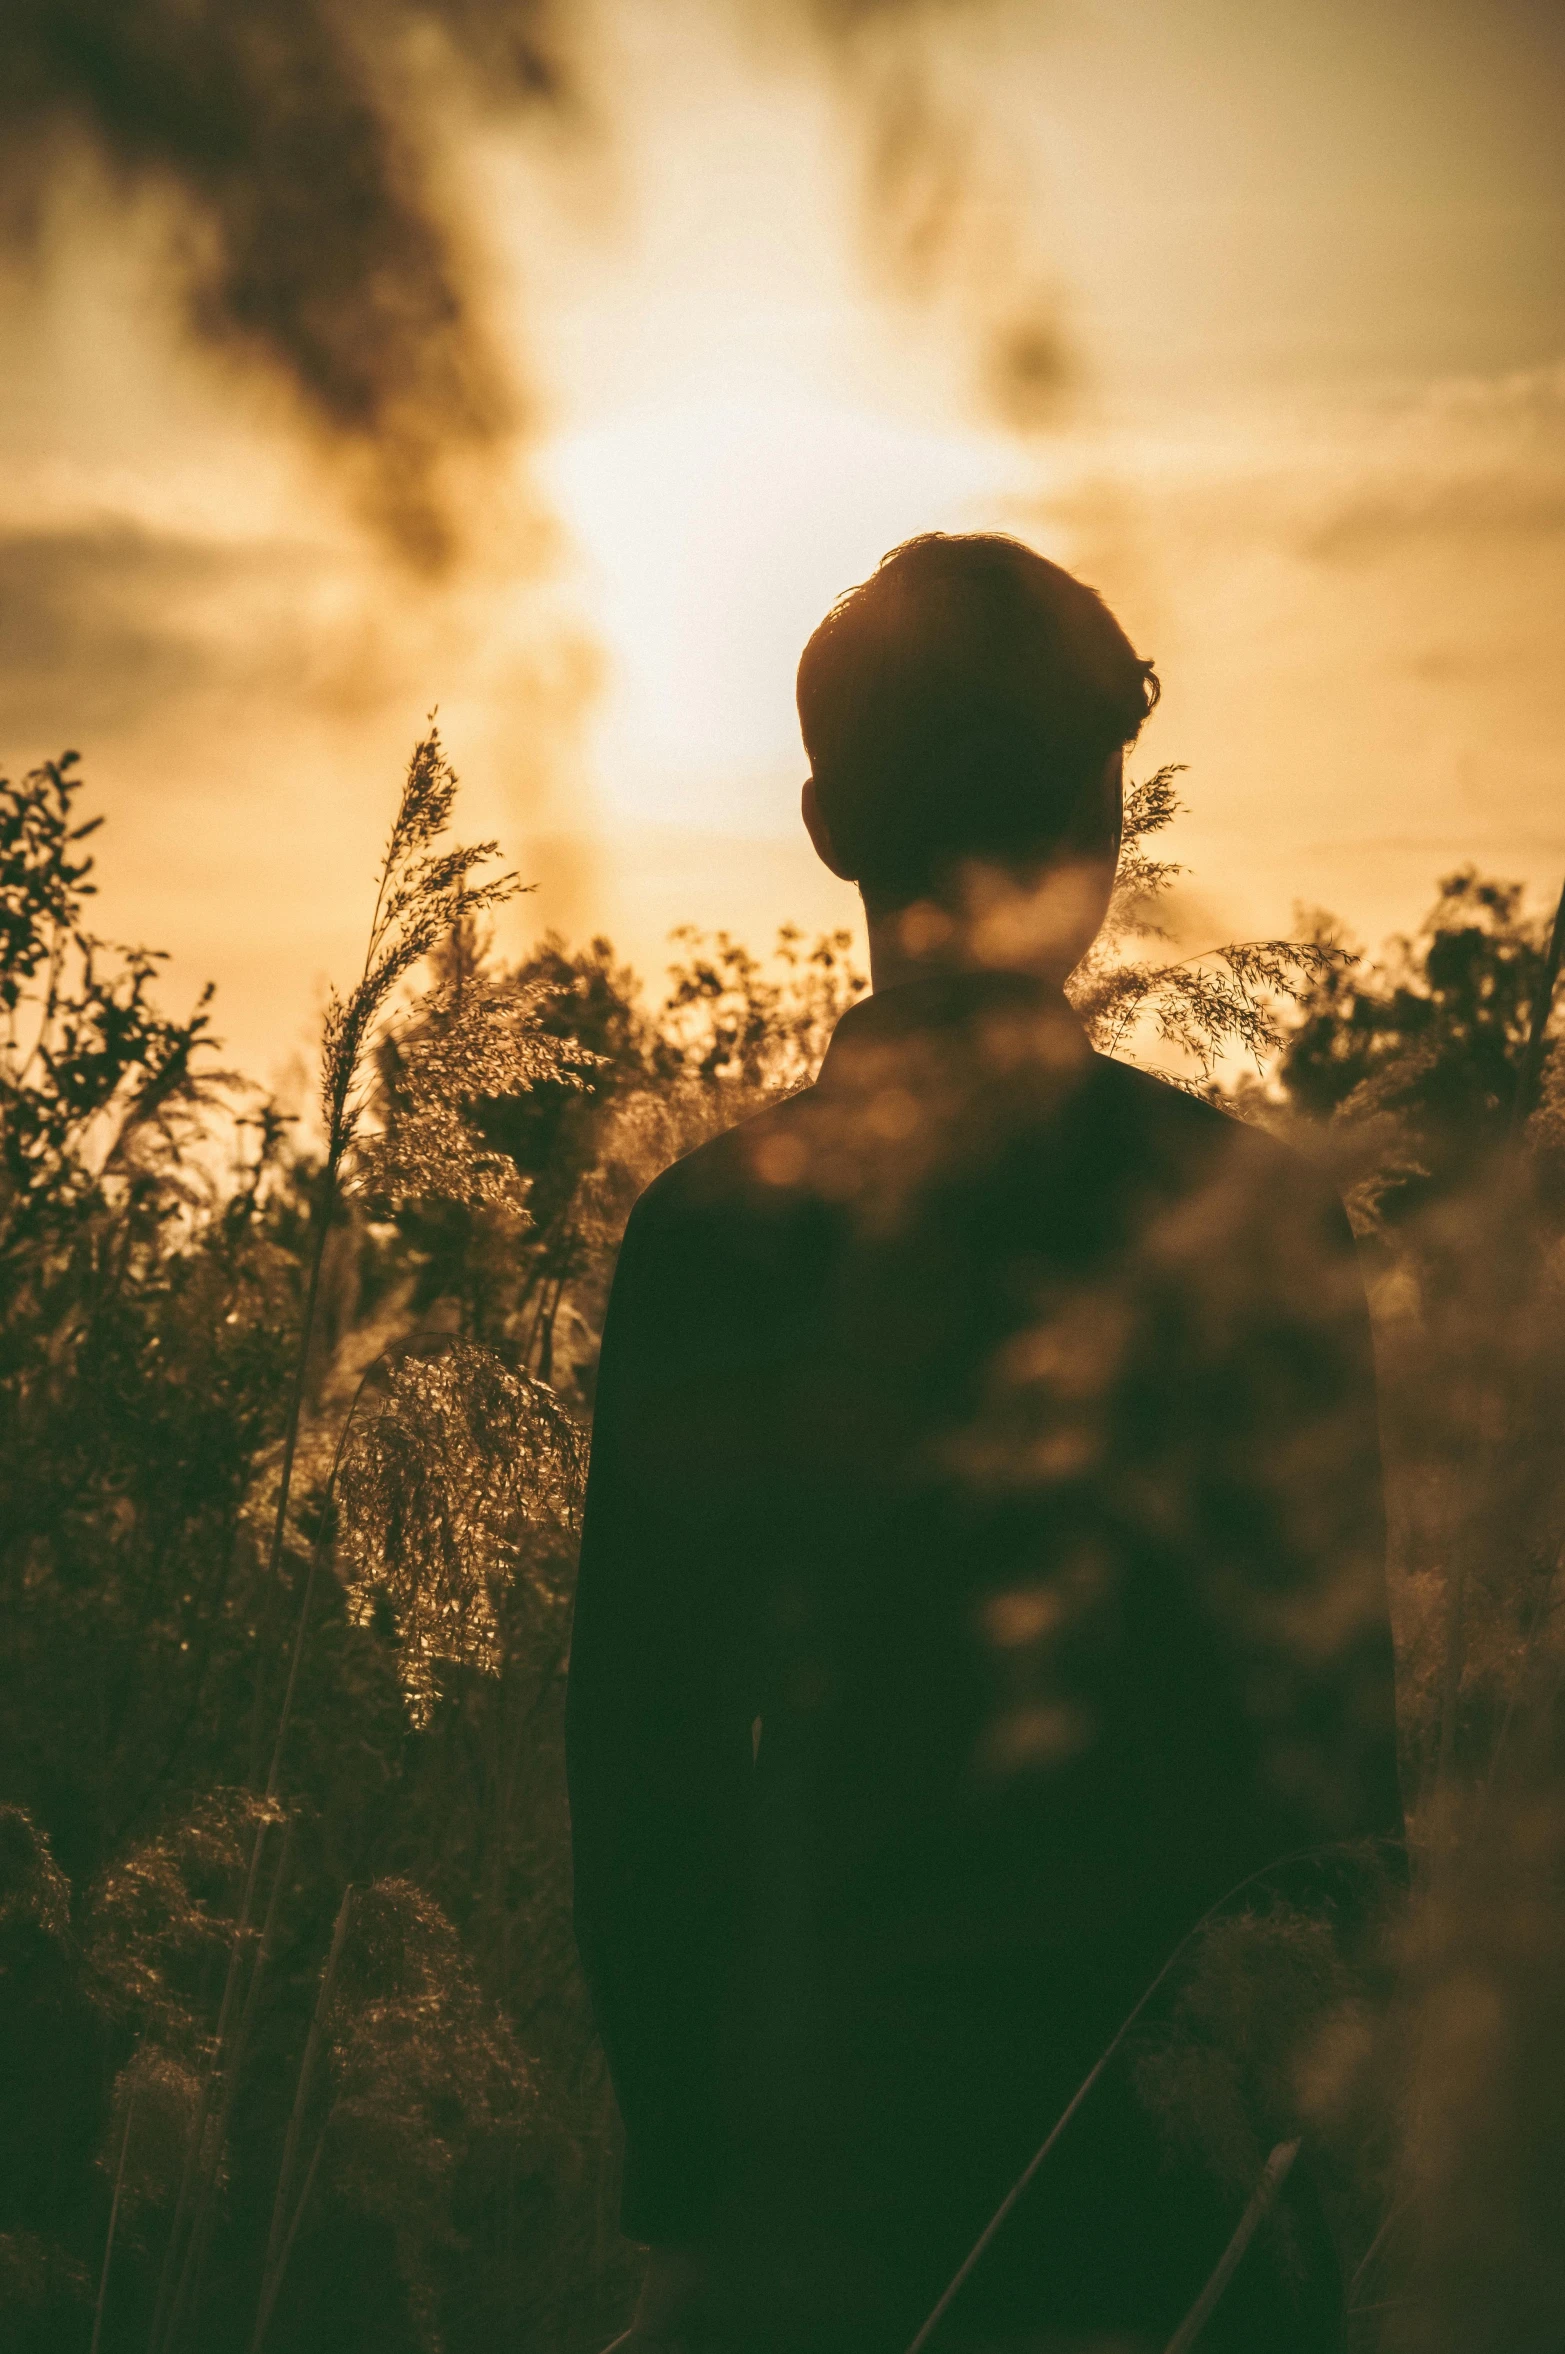 man standing in tall grass during sunset or dawn